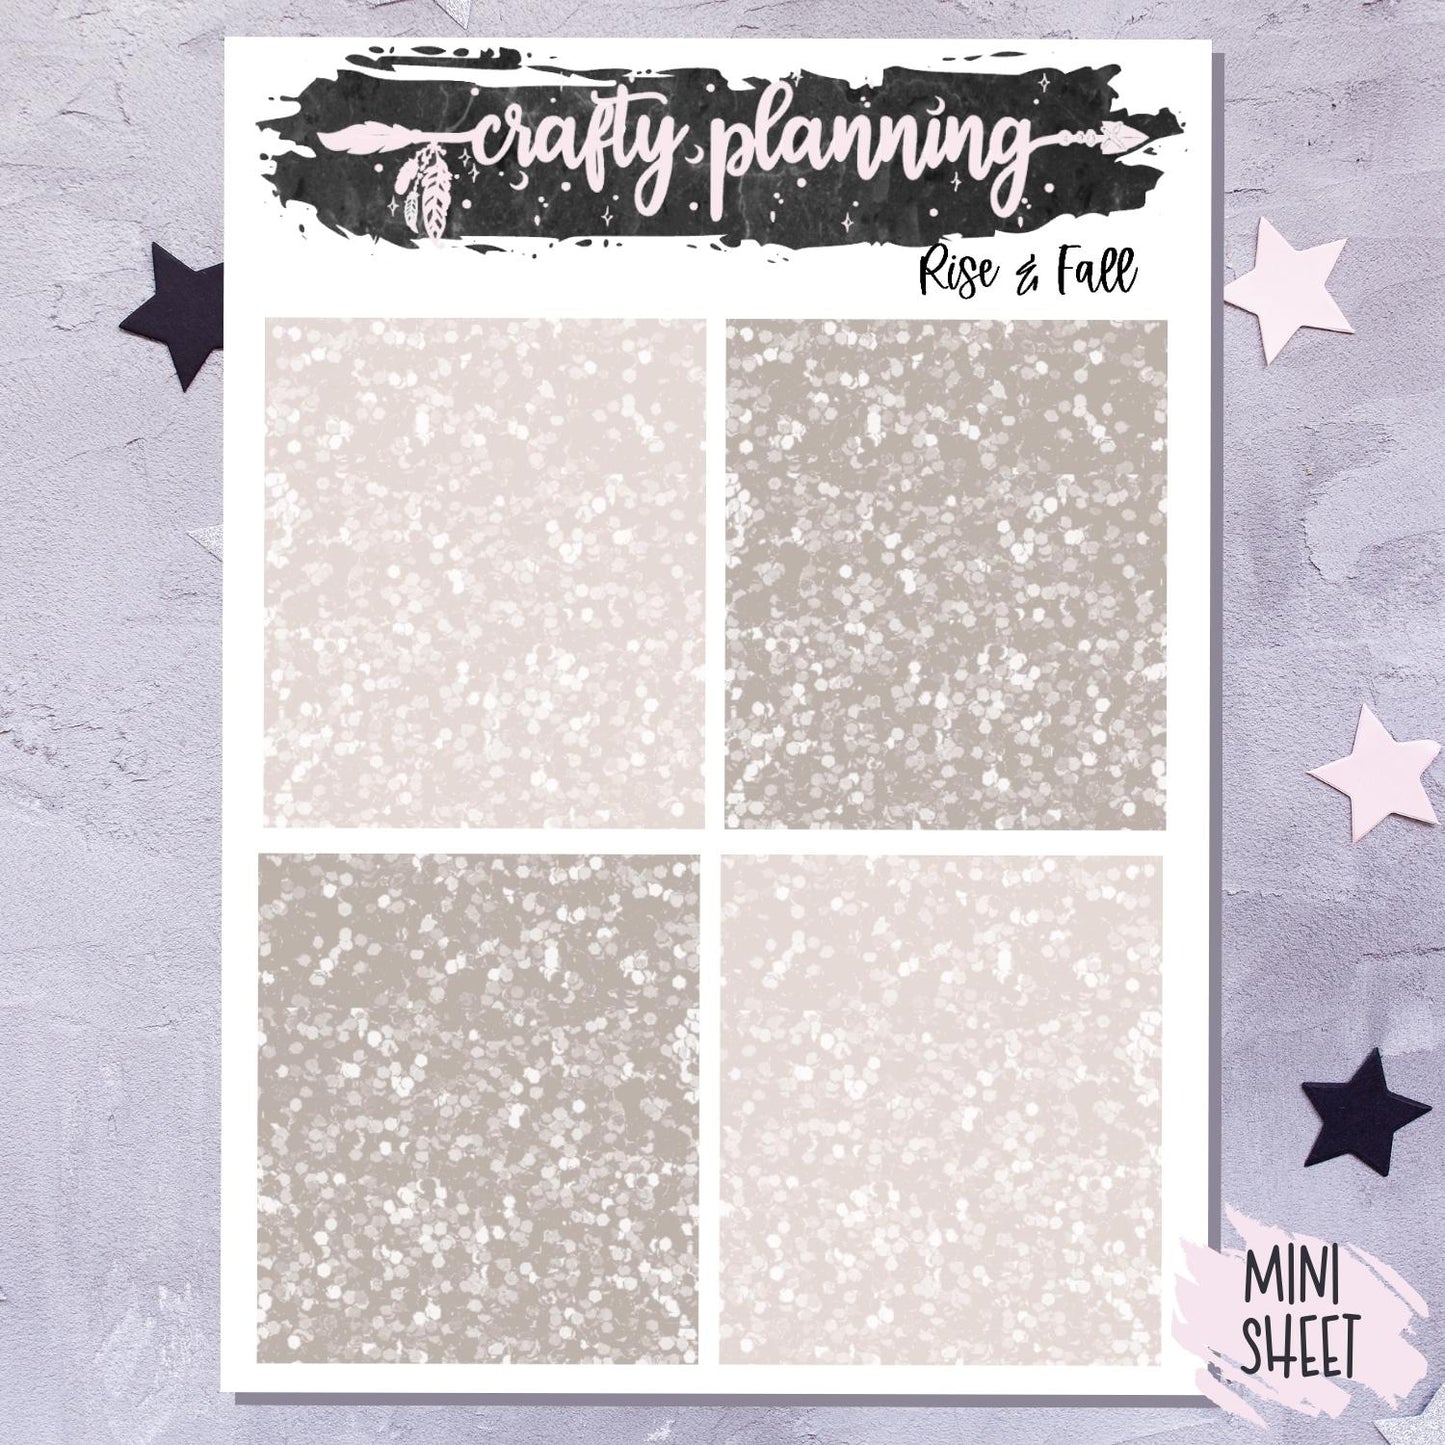 Rise & Fall - A La Carte - Weekly Vertical Planner Kit